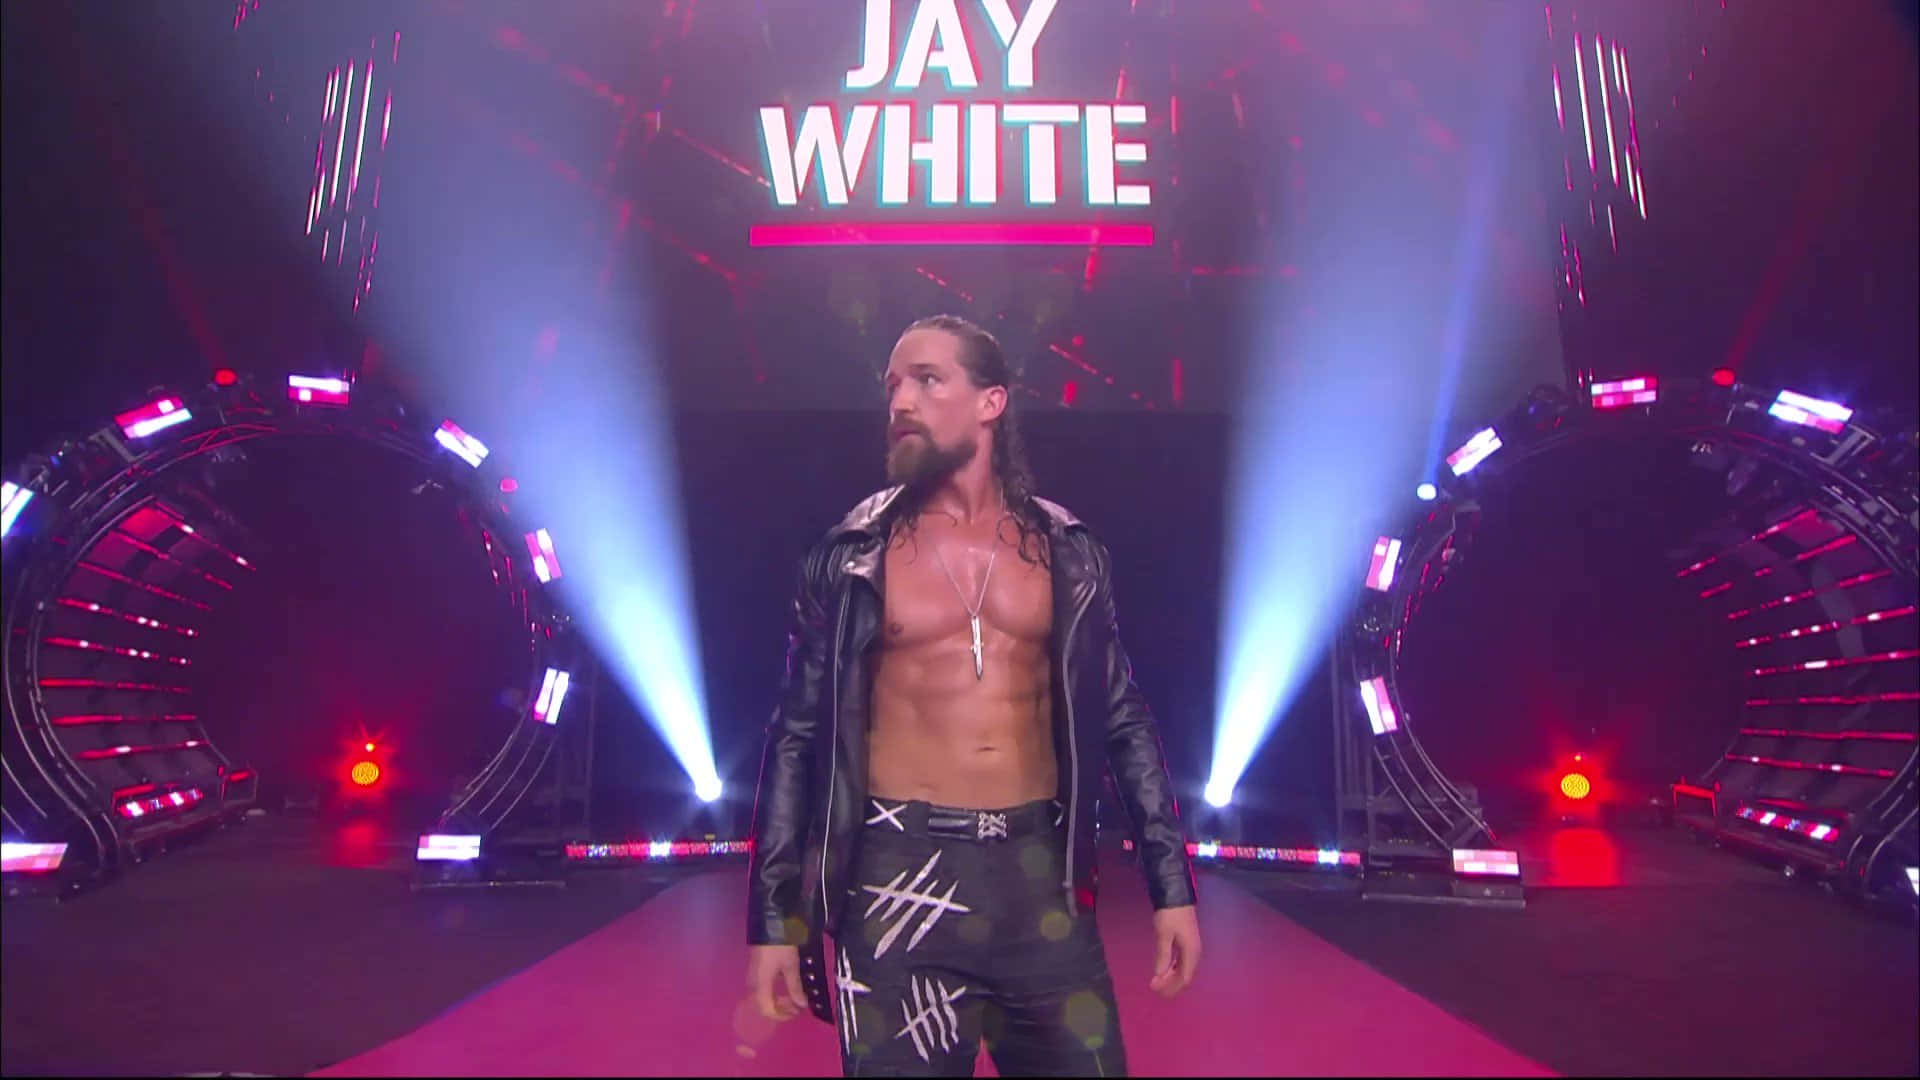 Jay White Walks Into Aew Rampage Stage Wallpaper